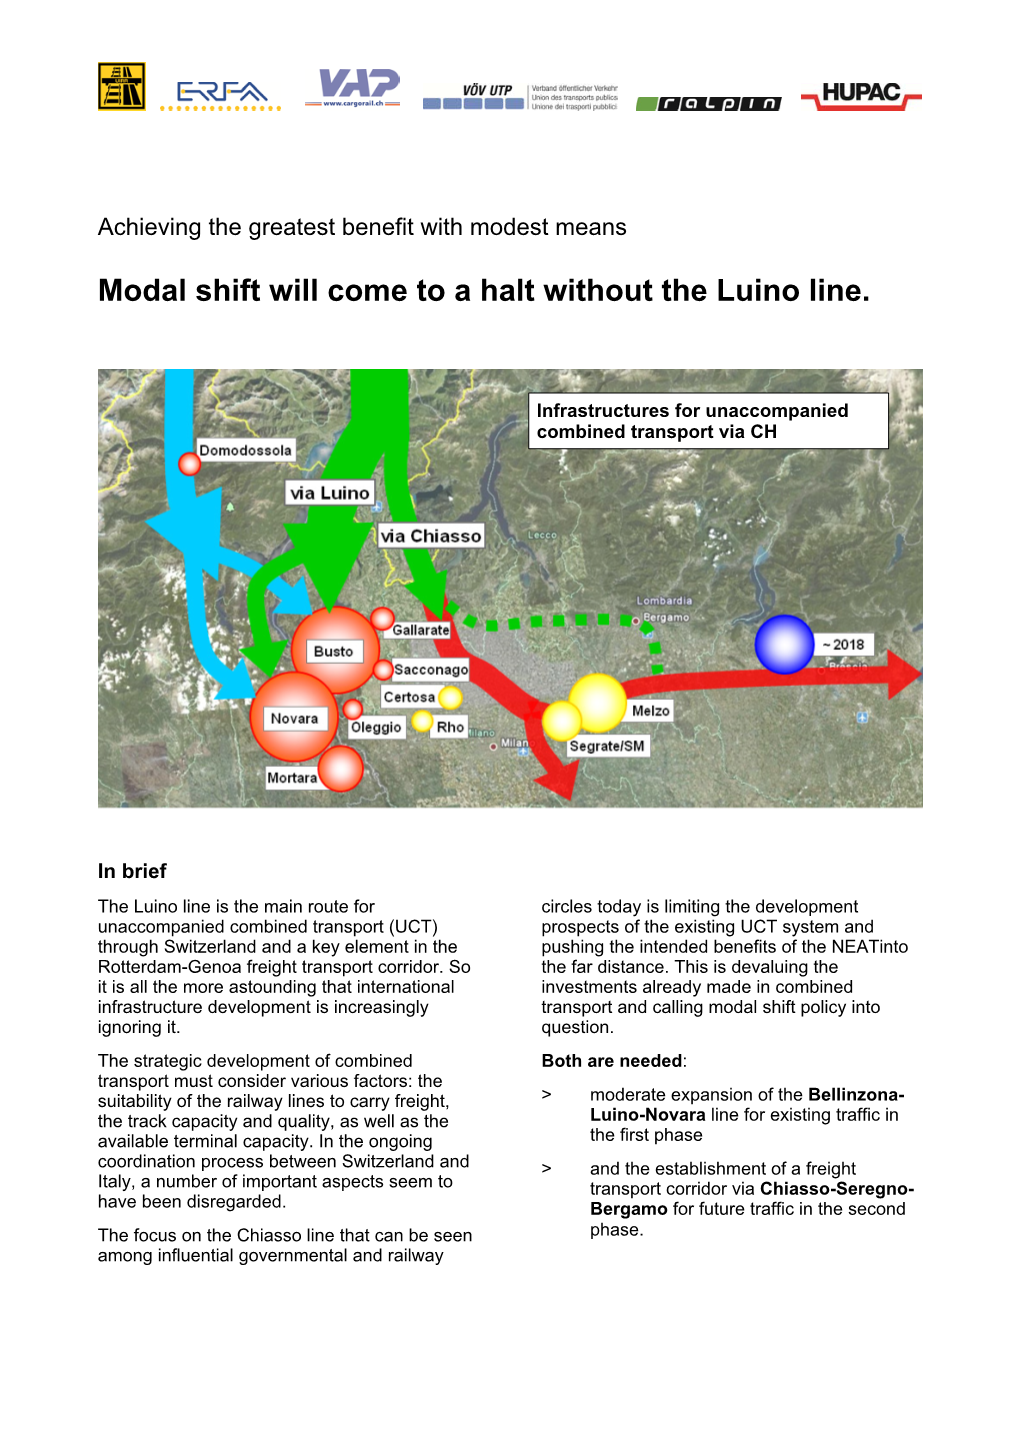 Modal Shift Will Come to a Halt Without the Luino Line